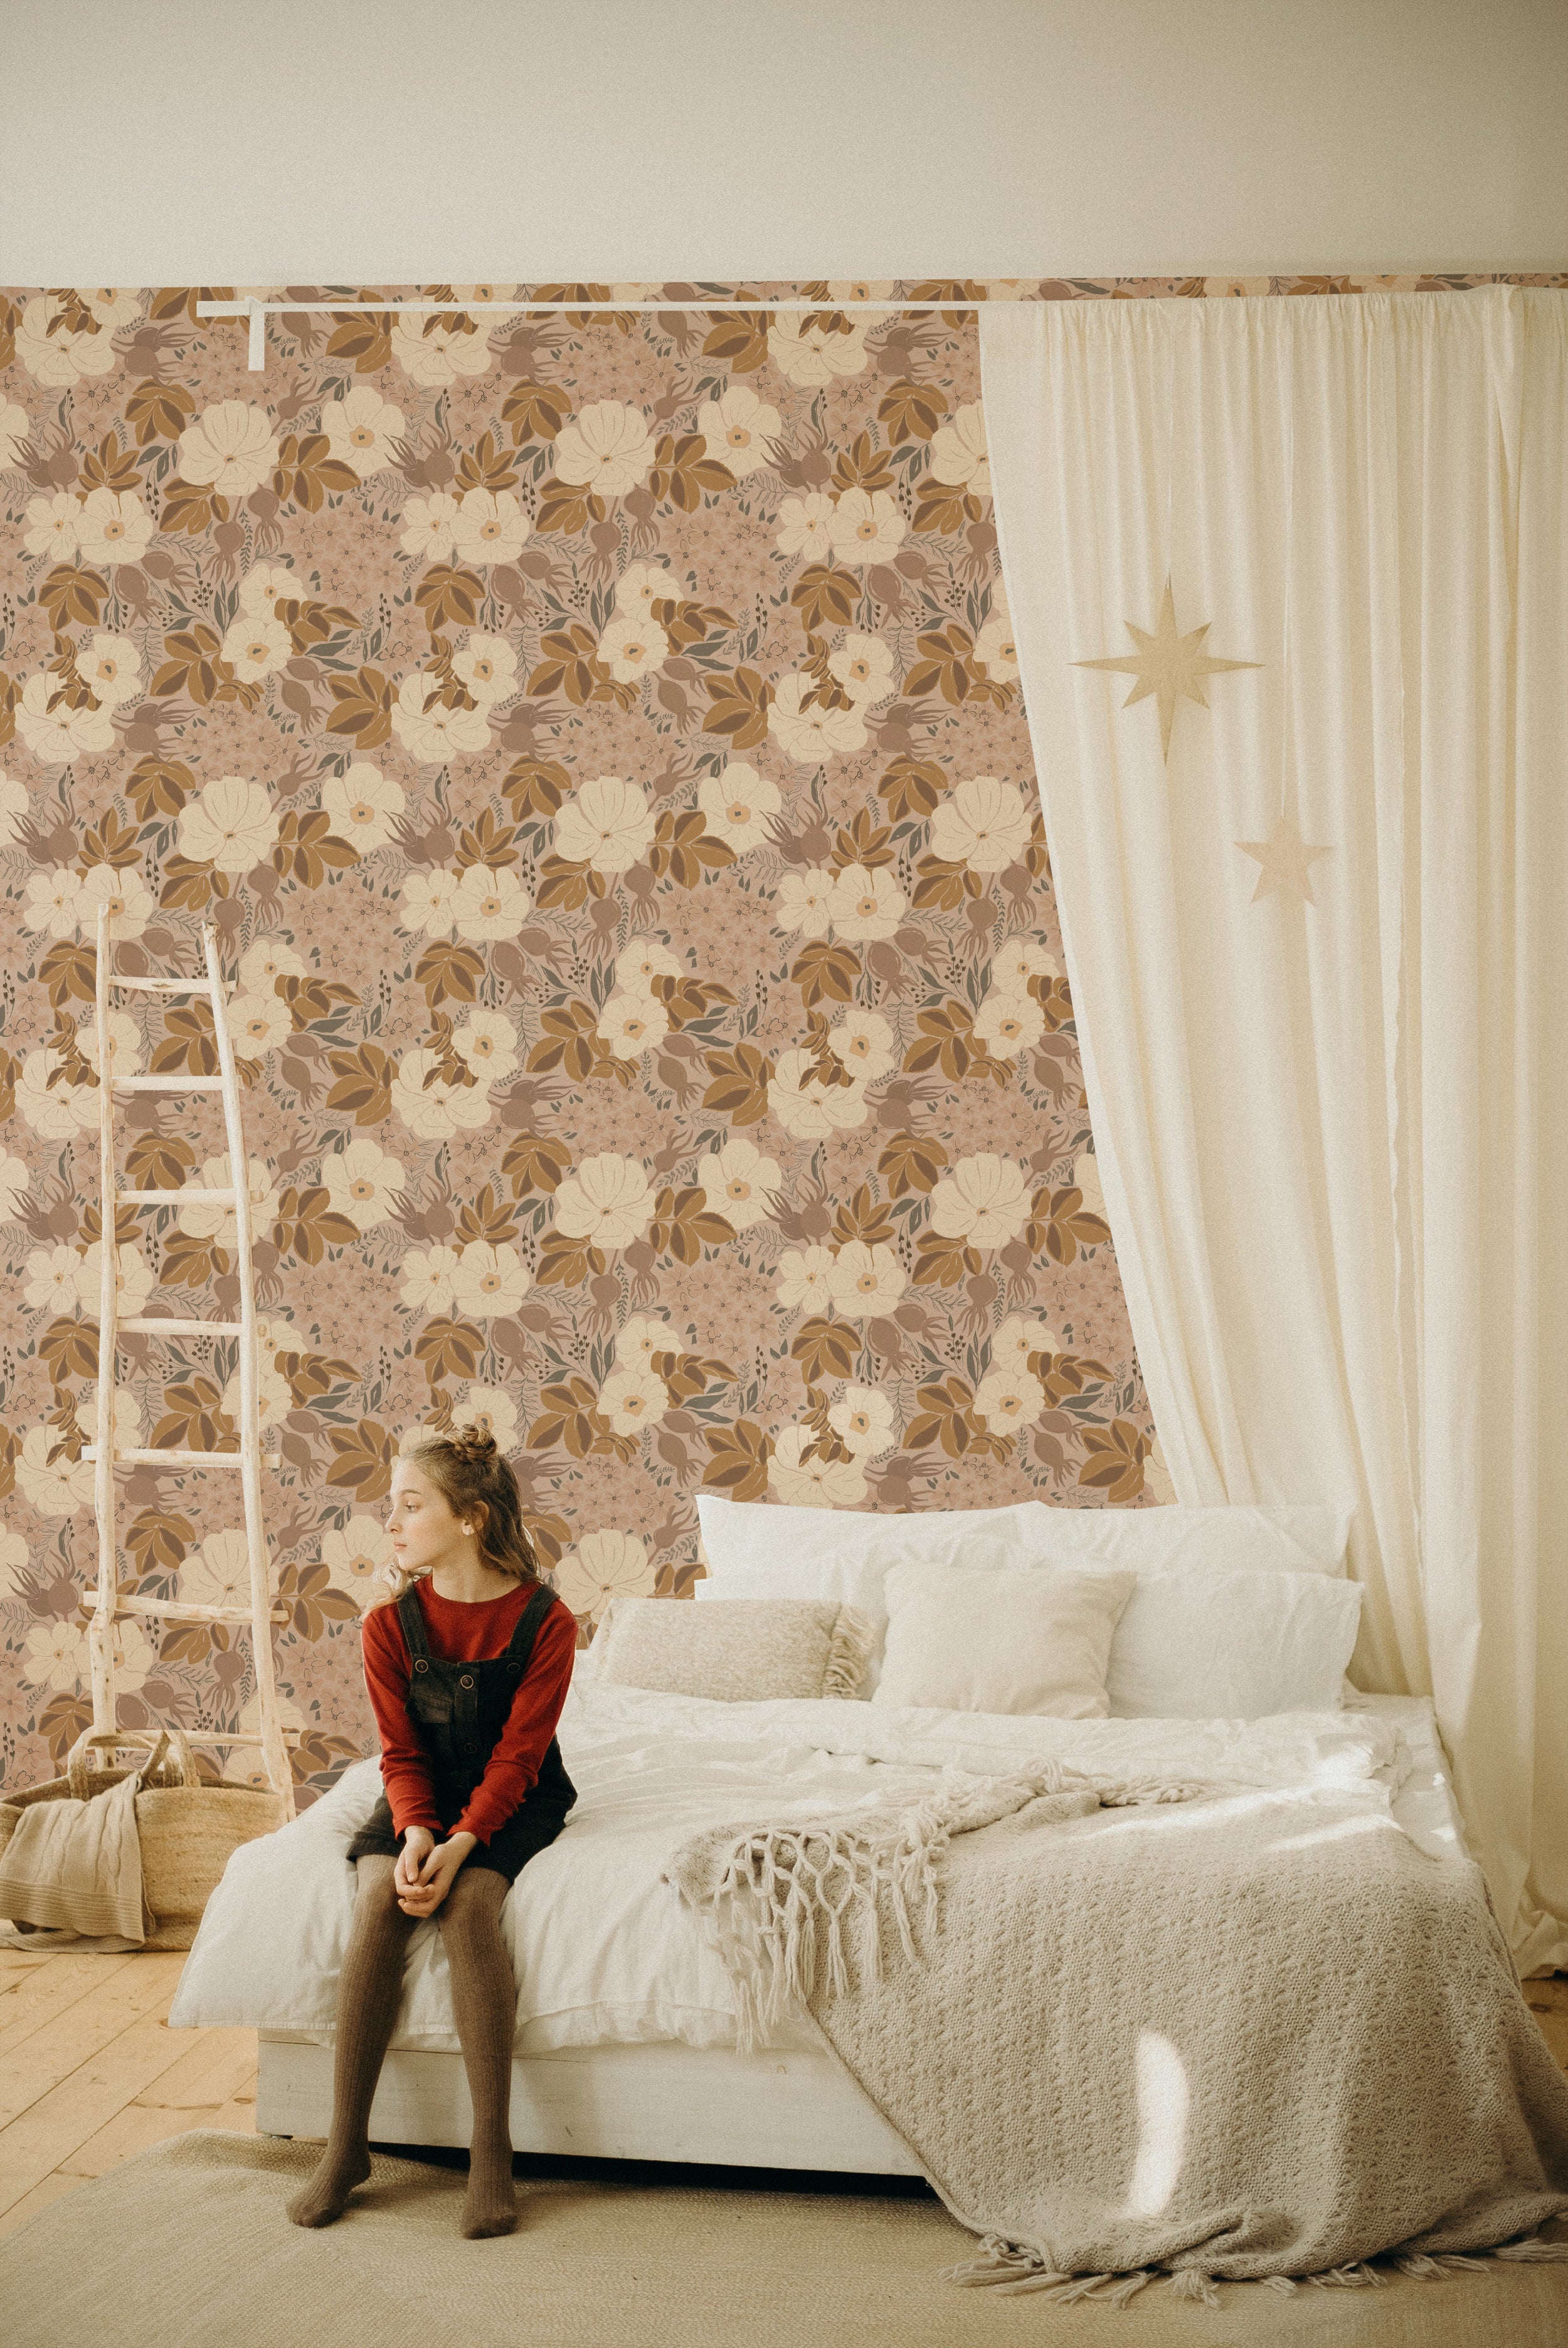 A cozy bedroom featuring a wooden ladder, a large bed with white bedding, and a light curtain adorned with star patterns. The room is decorated with the Rosehip Wallpaper, which displays a rich floral pattern with large white blooms and smaller pink flowers against a dark backdrop, adding a warm and inviting atmosphere.